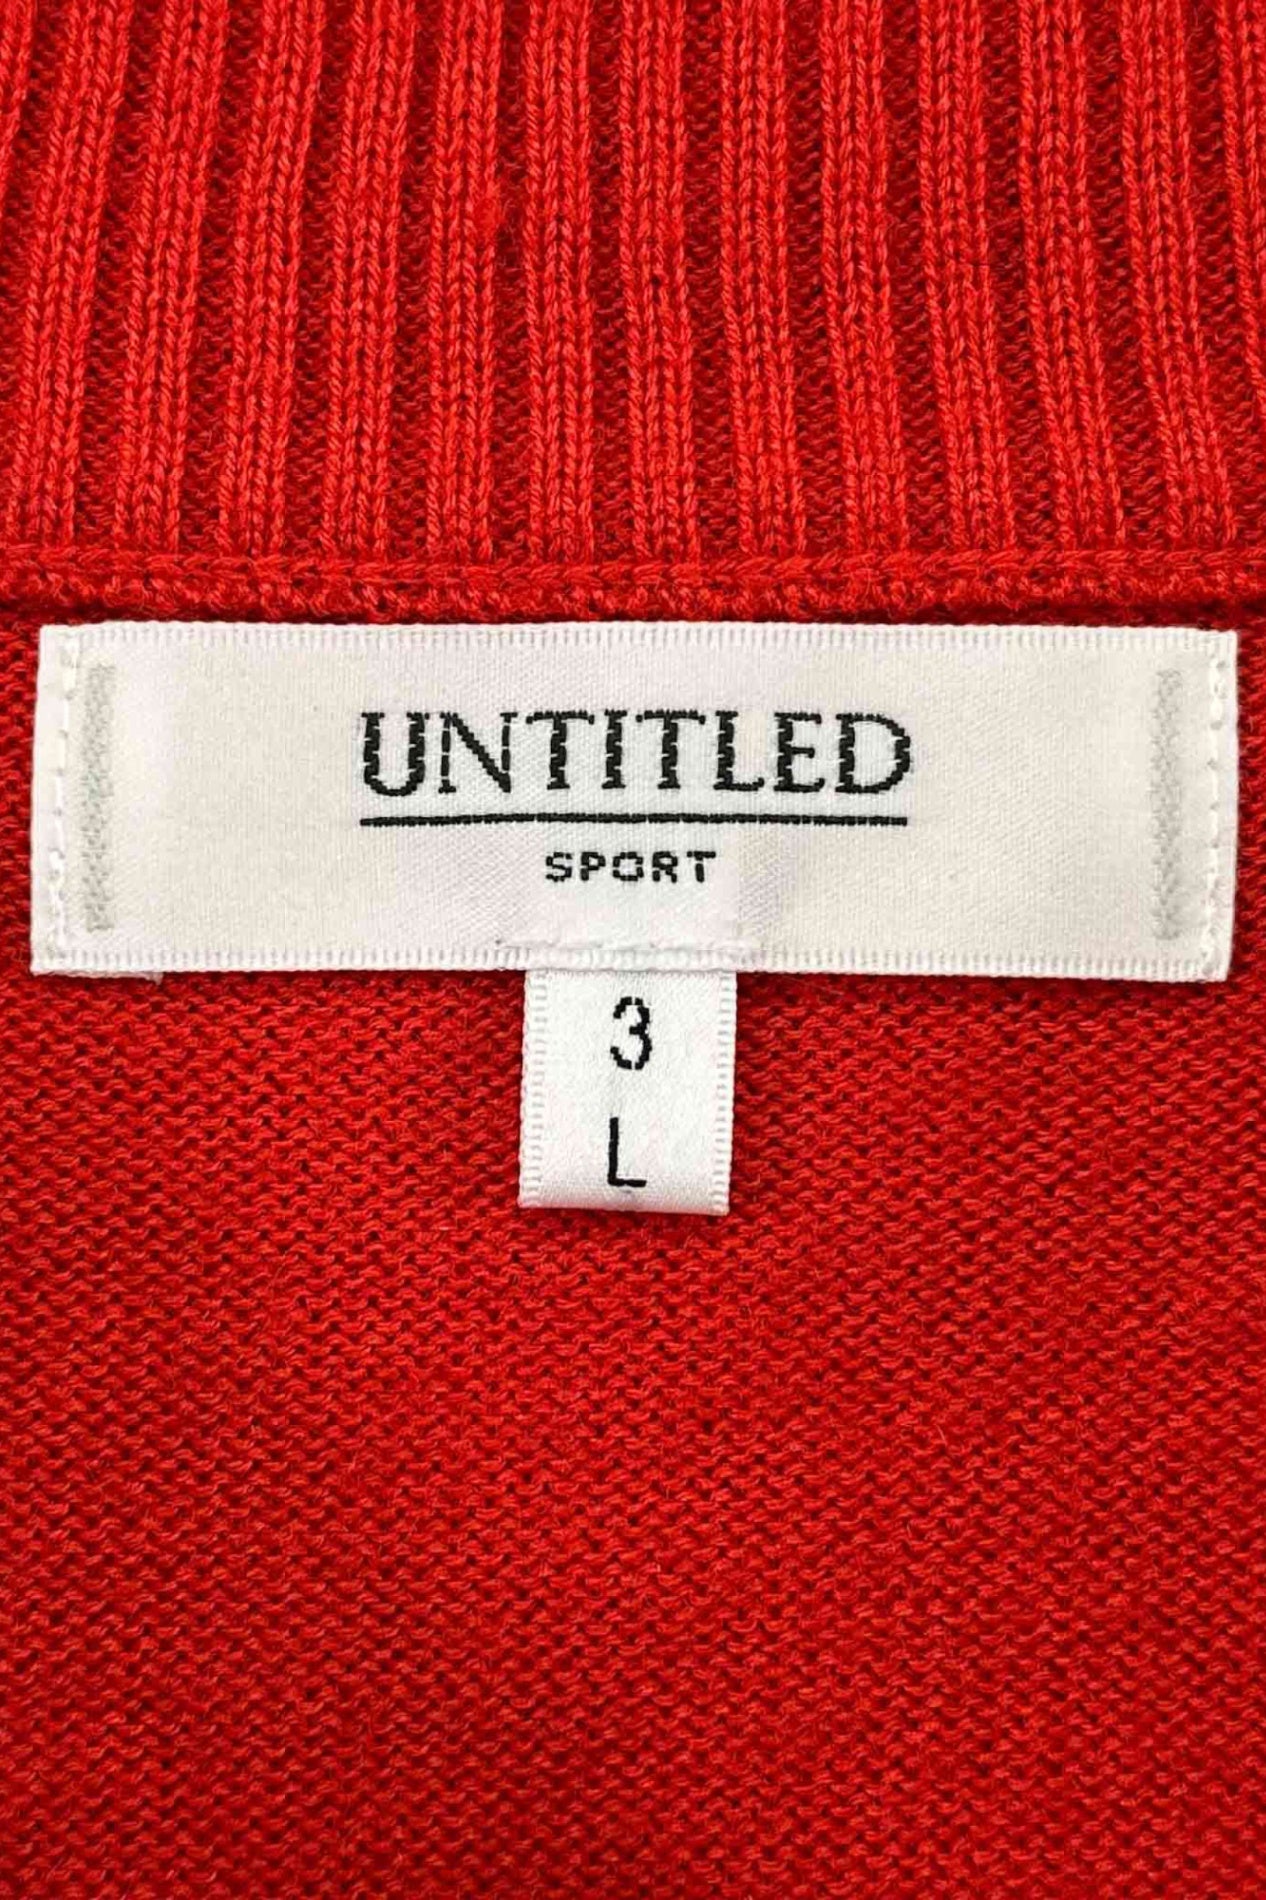 UNTITLED SPORT red sweater